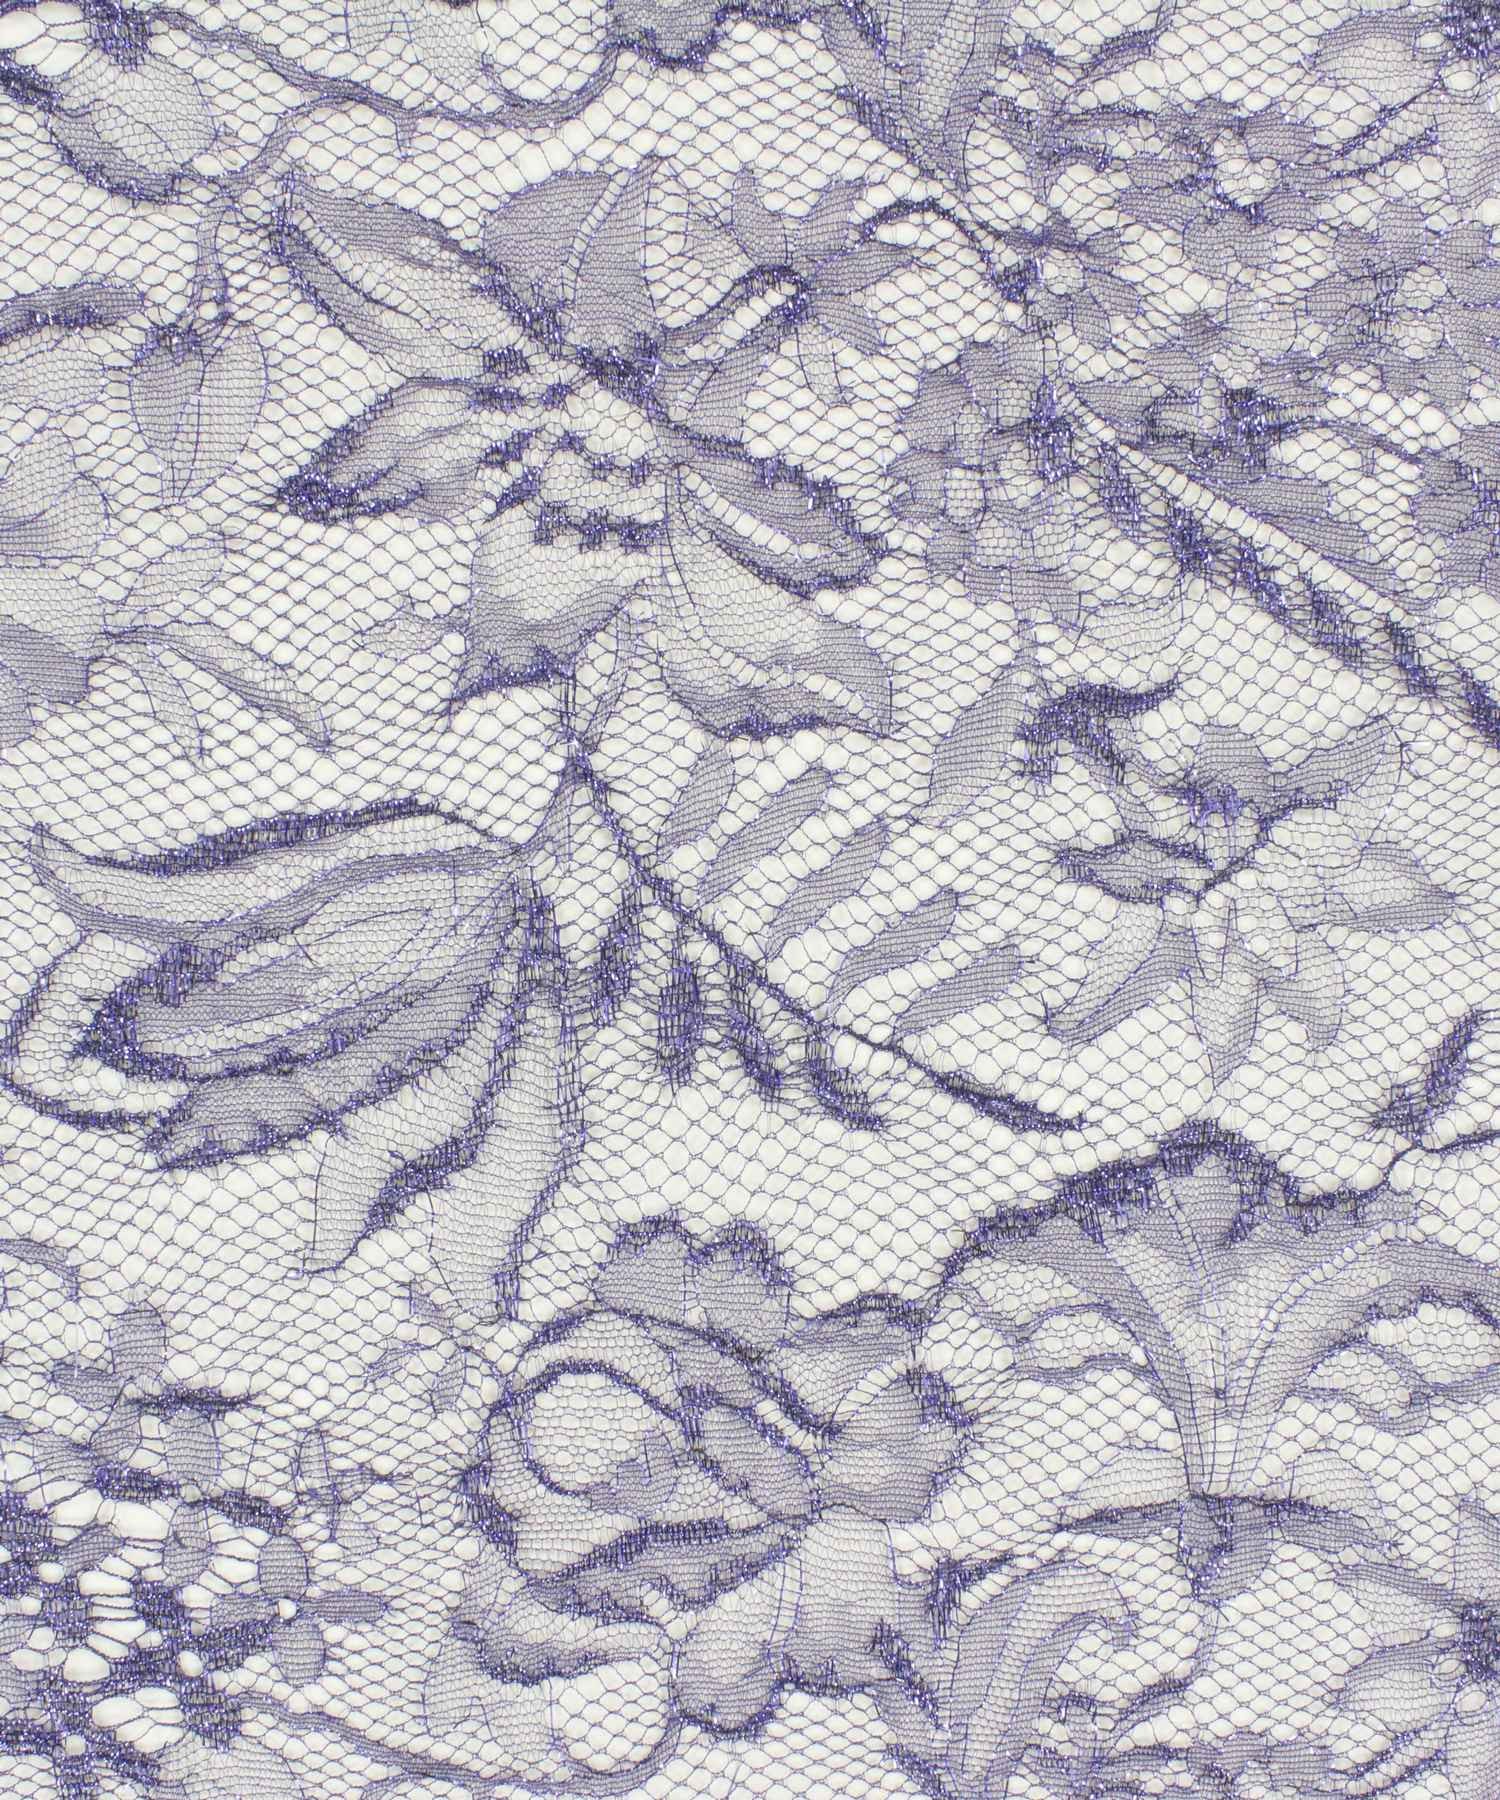 Giverny 95 cm | Lace & embroidery • Sophie Hallette